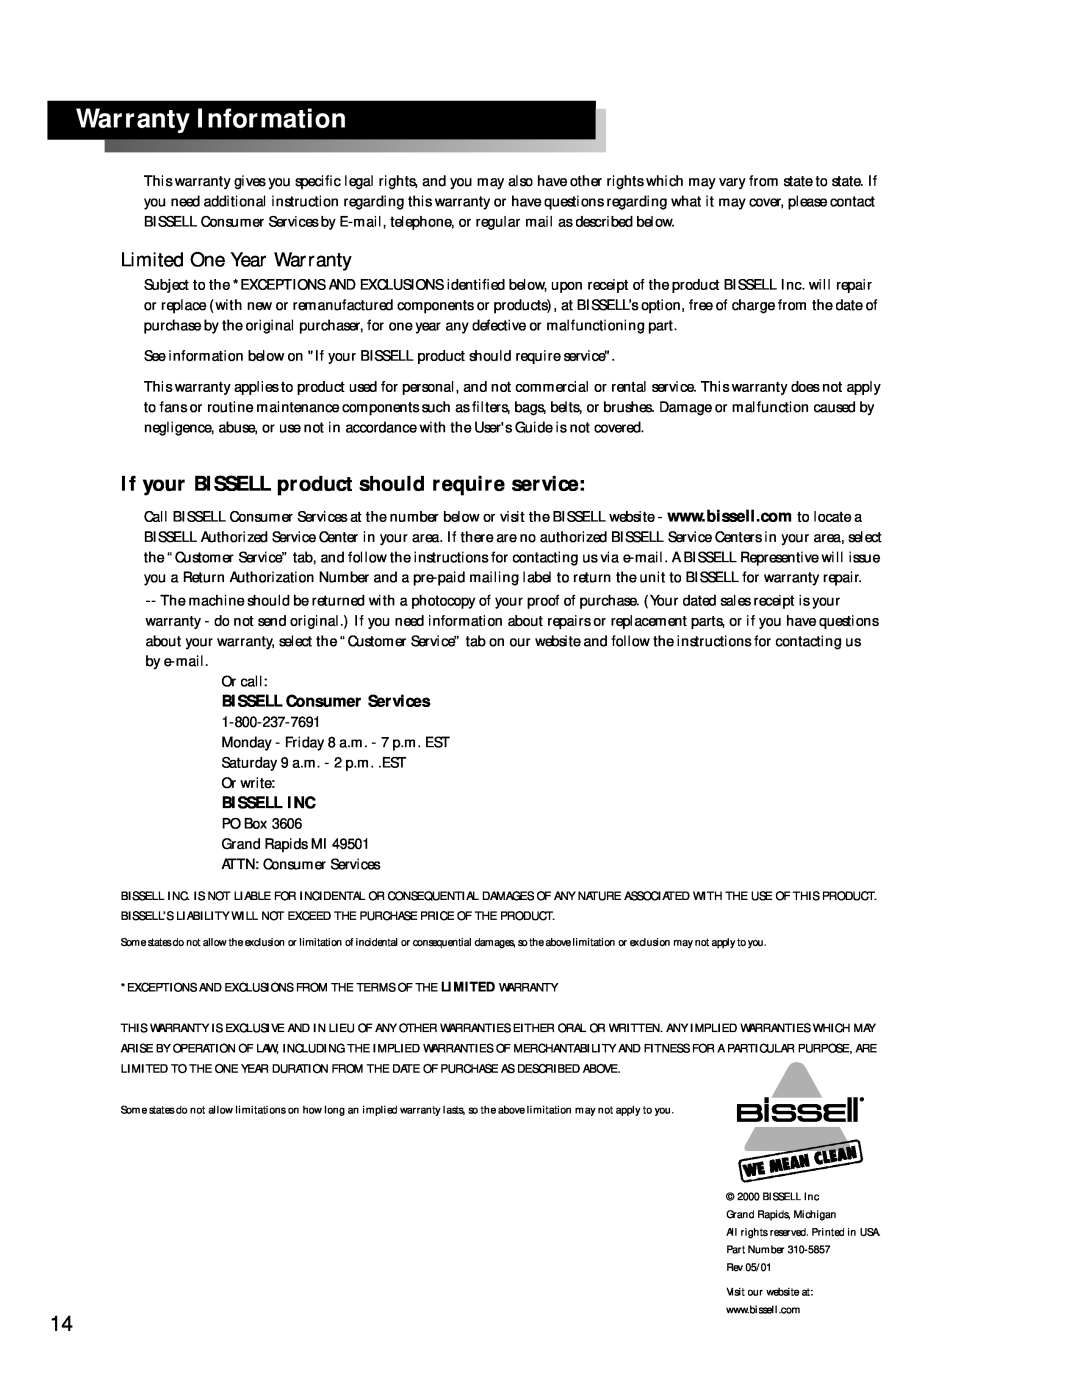 Bissell 3512 warranty Warranty Information, If your BISSELL product should require service, BISSELL Consumer Services 